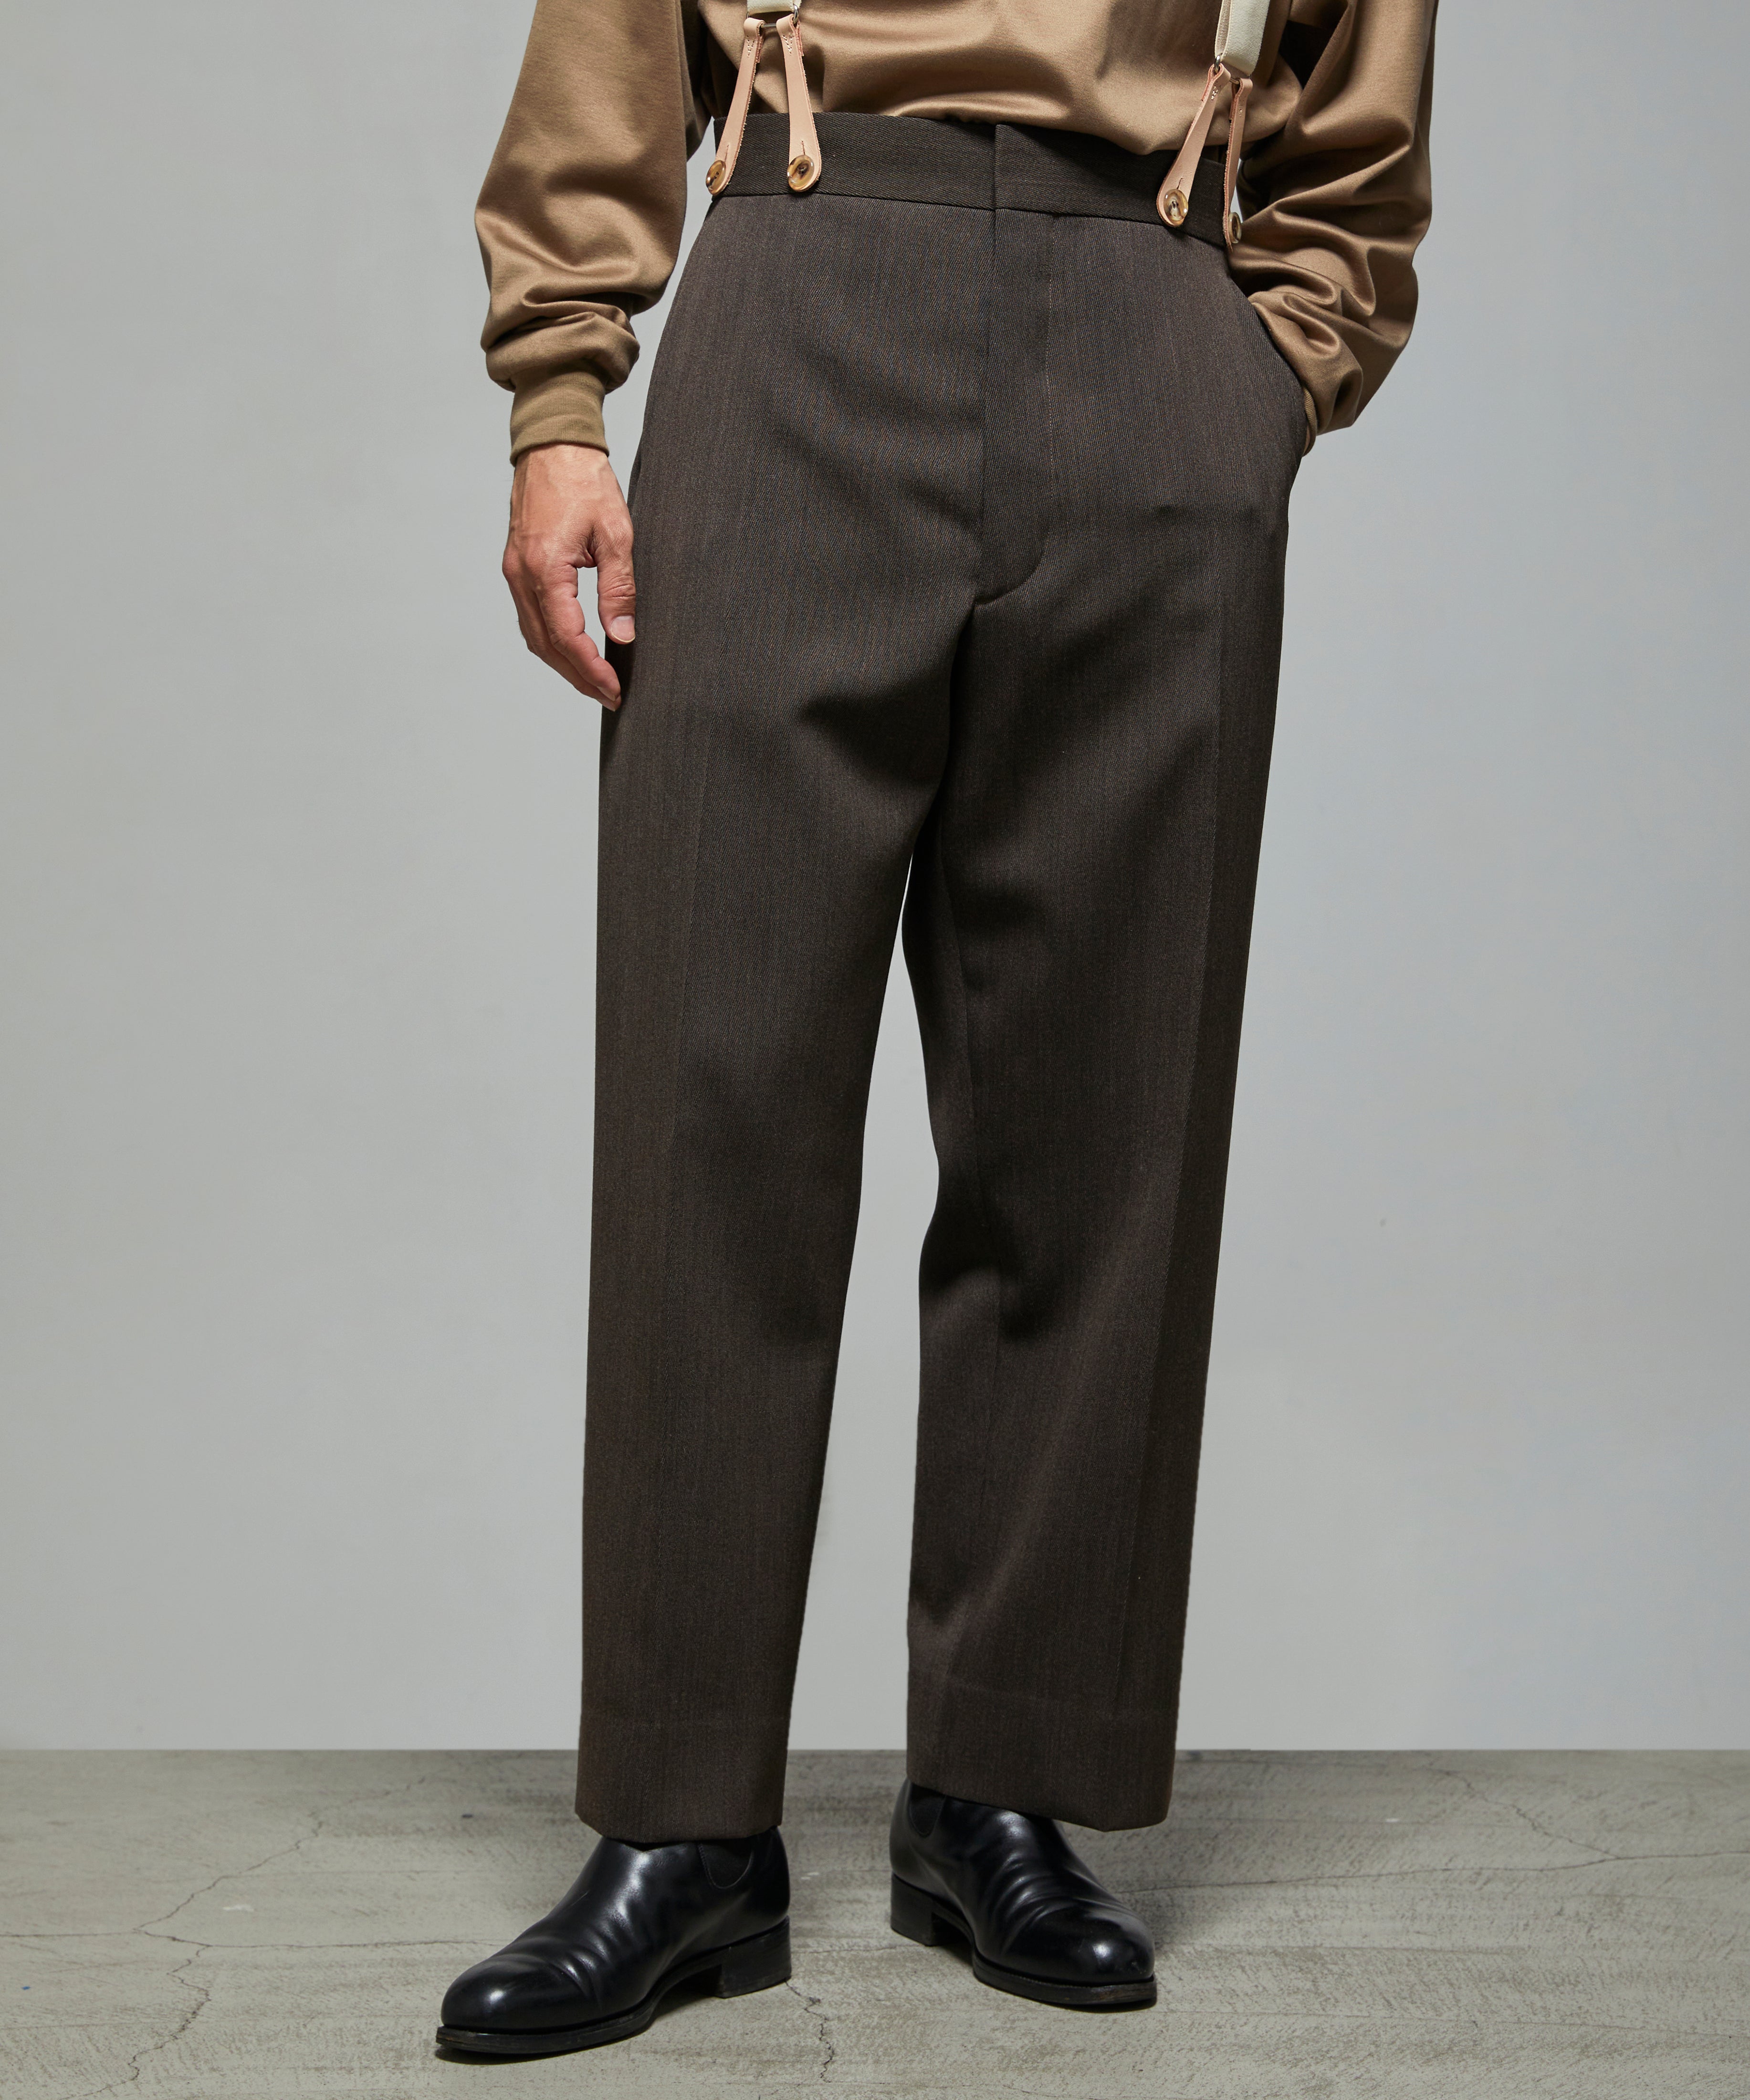 SOLIS CAVALRY TROUSERS